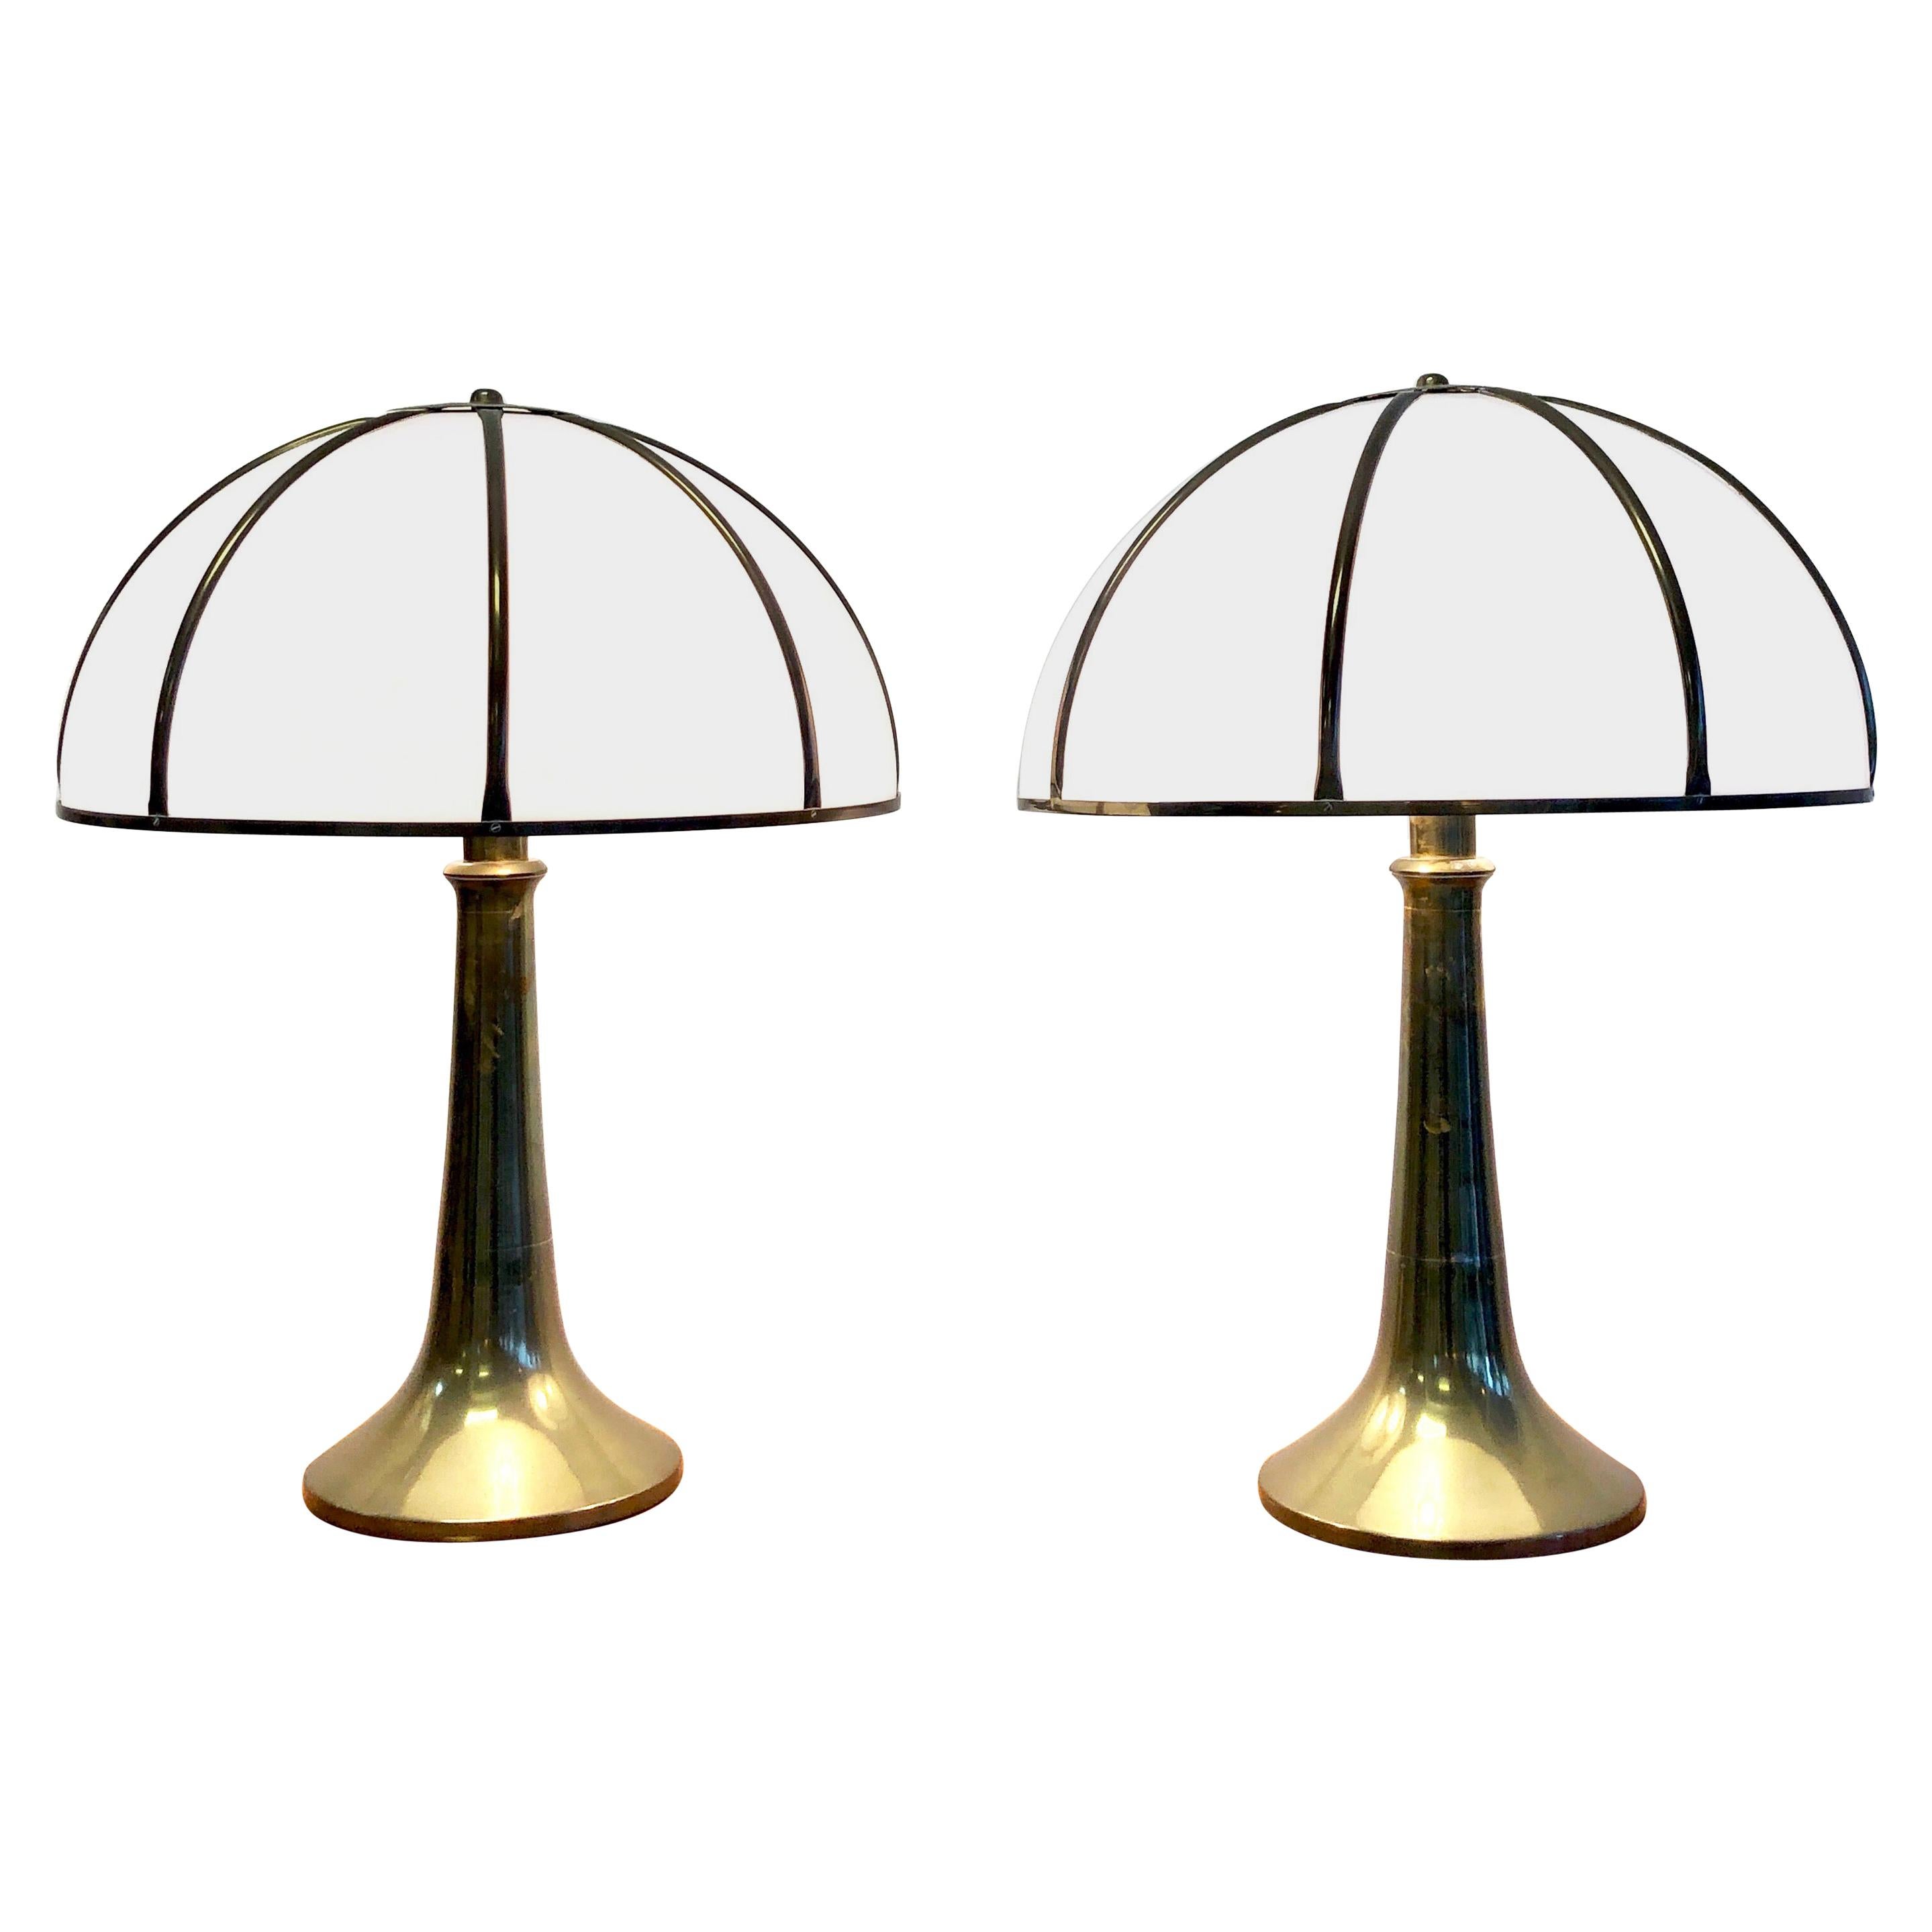 Gabriella Crespi Pair of Fungo Brass and Plexiglass Table Lamps, 1970